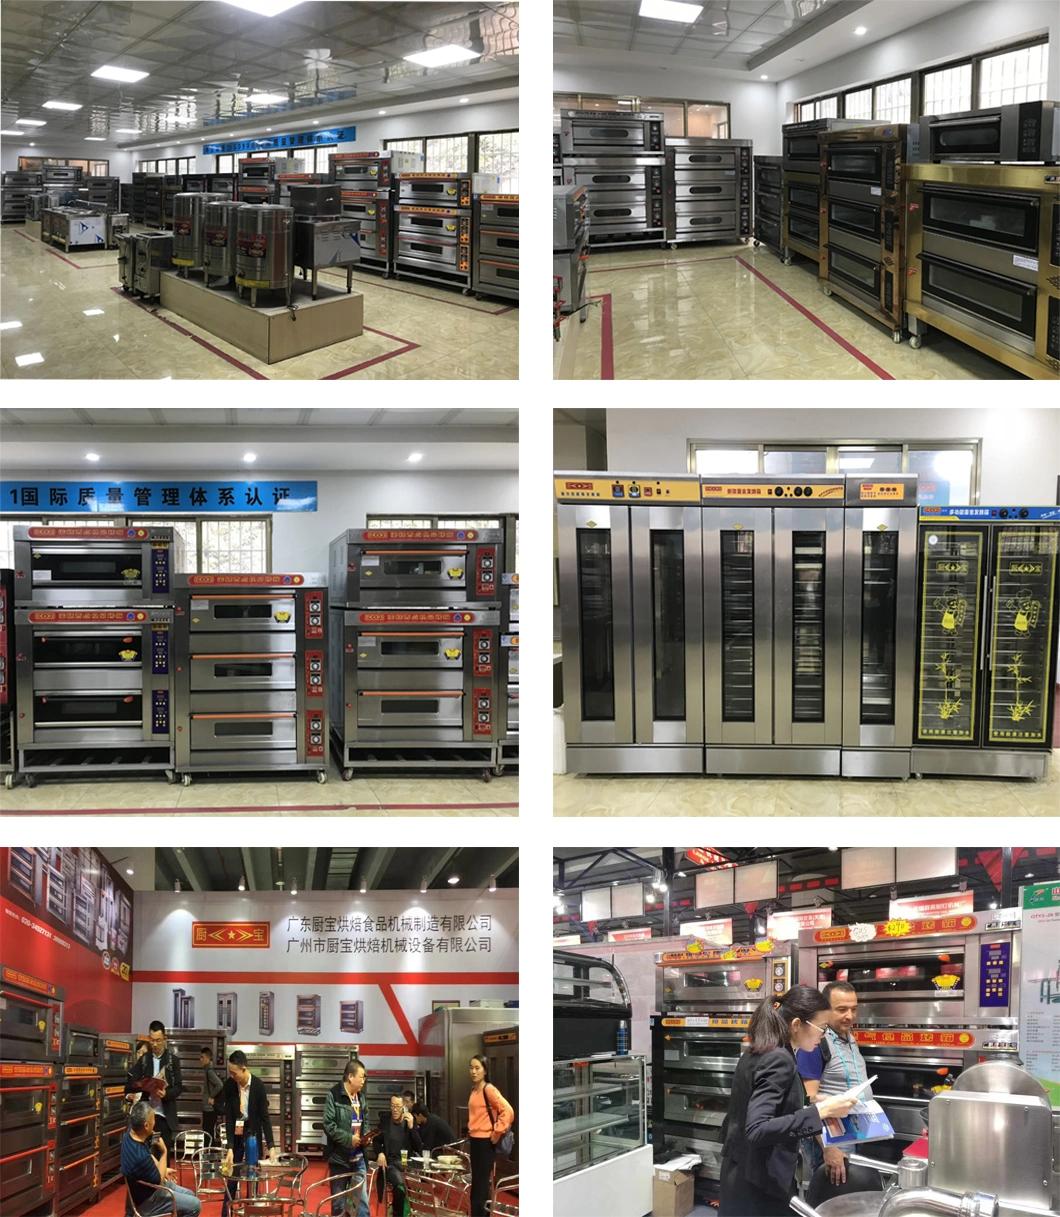 4 Deck 16 Trays Electric Pizza Oven for Commercial Kitchen Baking Equipment Bakery Machinery Food Machine